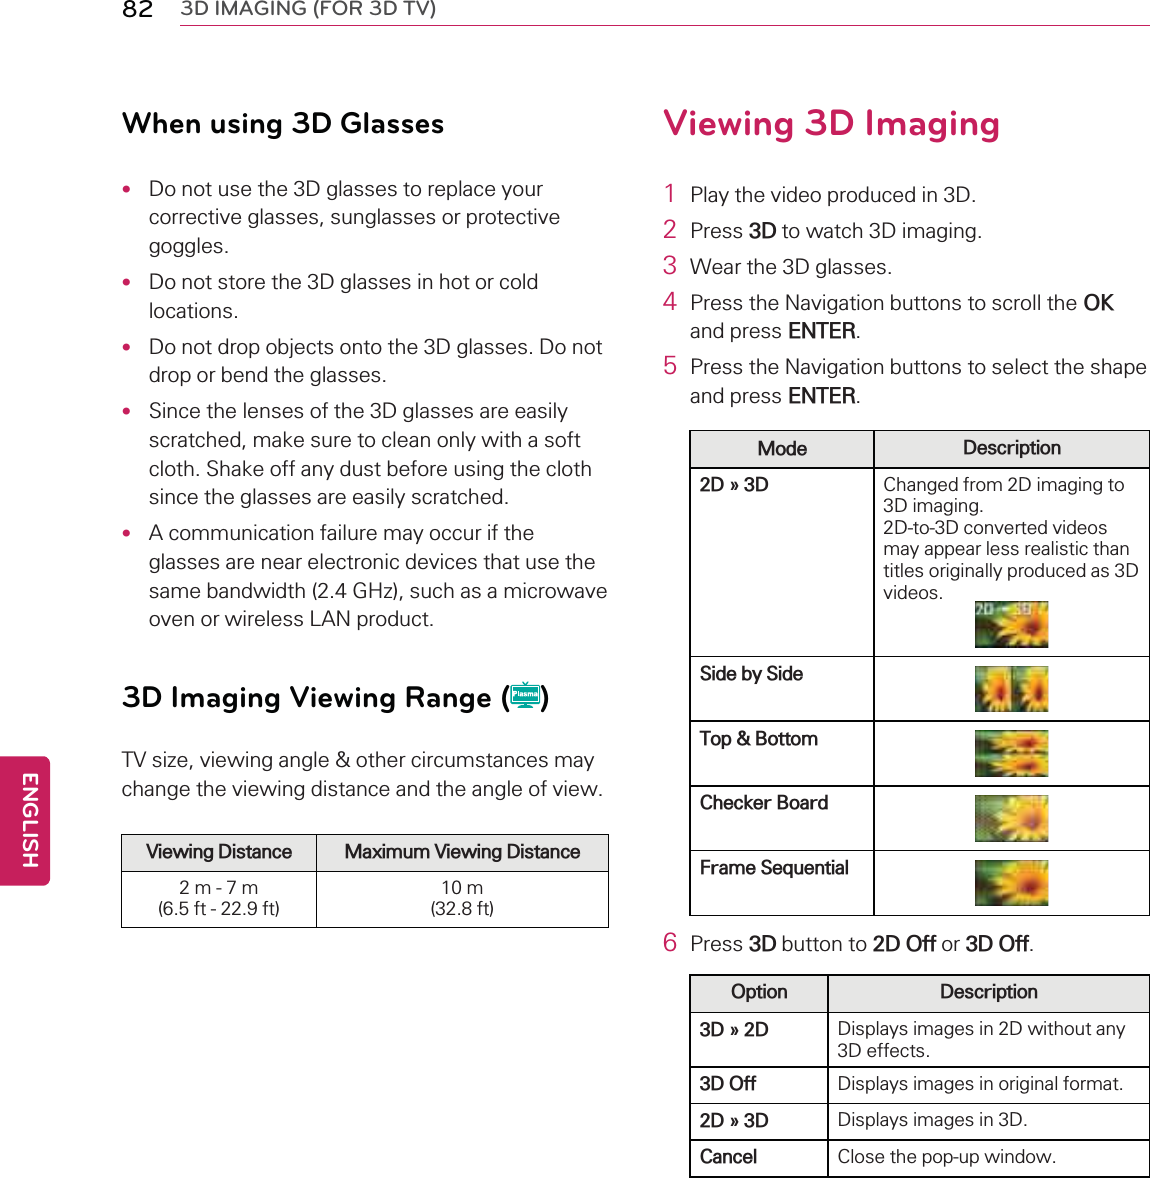 82 3D IMAGING (FOR 3D TV)When using 3D Glasses•Do not use the 3D glasses to replace yourcorrective glasses, sunglasses or protectivegoggles.•Do not store the 3D glasses in hot or coldlocations.•Do not drop objects onto the 3D glasses. Do notdrop or bend the glasses.•Since the lenses of the 3D glasses are easilyscratched, make sure to clean only with a softcloth. Shake off any dust before using the clothsince the glasses are easily scratched.•A communication failure may occur if theglasses are near electronic devices that use thesame bandwidth (2.4 GHz), such as a microwaveoven or wireless LAN product.3D Imaging Viewing Range ( )TV size, viewing angle &amp; other circumstances maychange the viewing distance and the angle of view.Viewing Distance Maximum Viewing Distance2m-7m(6.5 ft - 22.9 ft)10 m(32.8 ft)Viewing 3D Imaging1Play the video produced in 3D.2Press 3D to watch 3D imaging.3Wear the 3D glasses.4Press the Navigation buttons to scroll the OKand press ENTER.5Press the Navigation buttons to select the shapeand press ENTER.Mode Description2D » 3D Changed from 2D imaging to3D imaging.2D-to-3D converted videosmay appear less realistic thantitles originally produced as 3Dvideos.Side by SideTop &amp; BottomChecker BoardFrame Sequential6Press 3D button to 2D Off or 3D Off.Option Description3D » 2D Displays images in 2D without any3D effects.3D Off Displays images in original format.2D » 3D Displays images in 3D.Cancel Close the pop-up window.ENGLISH